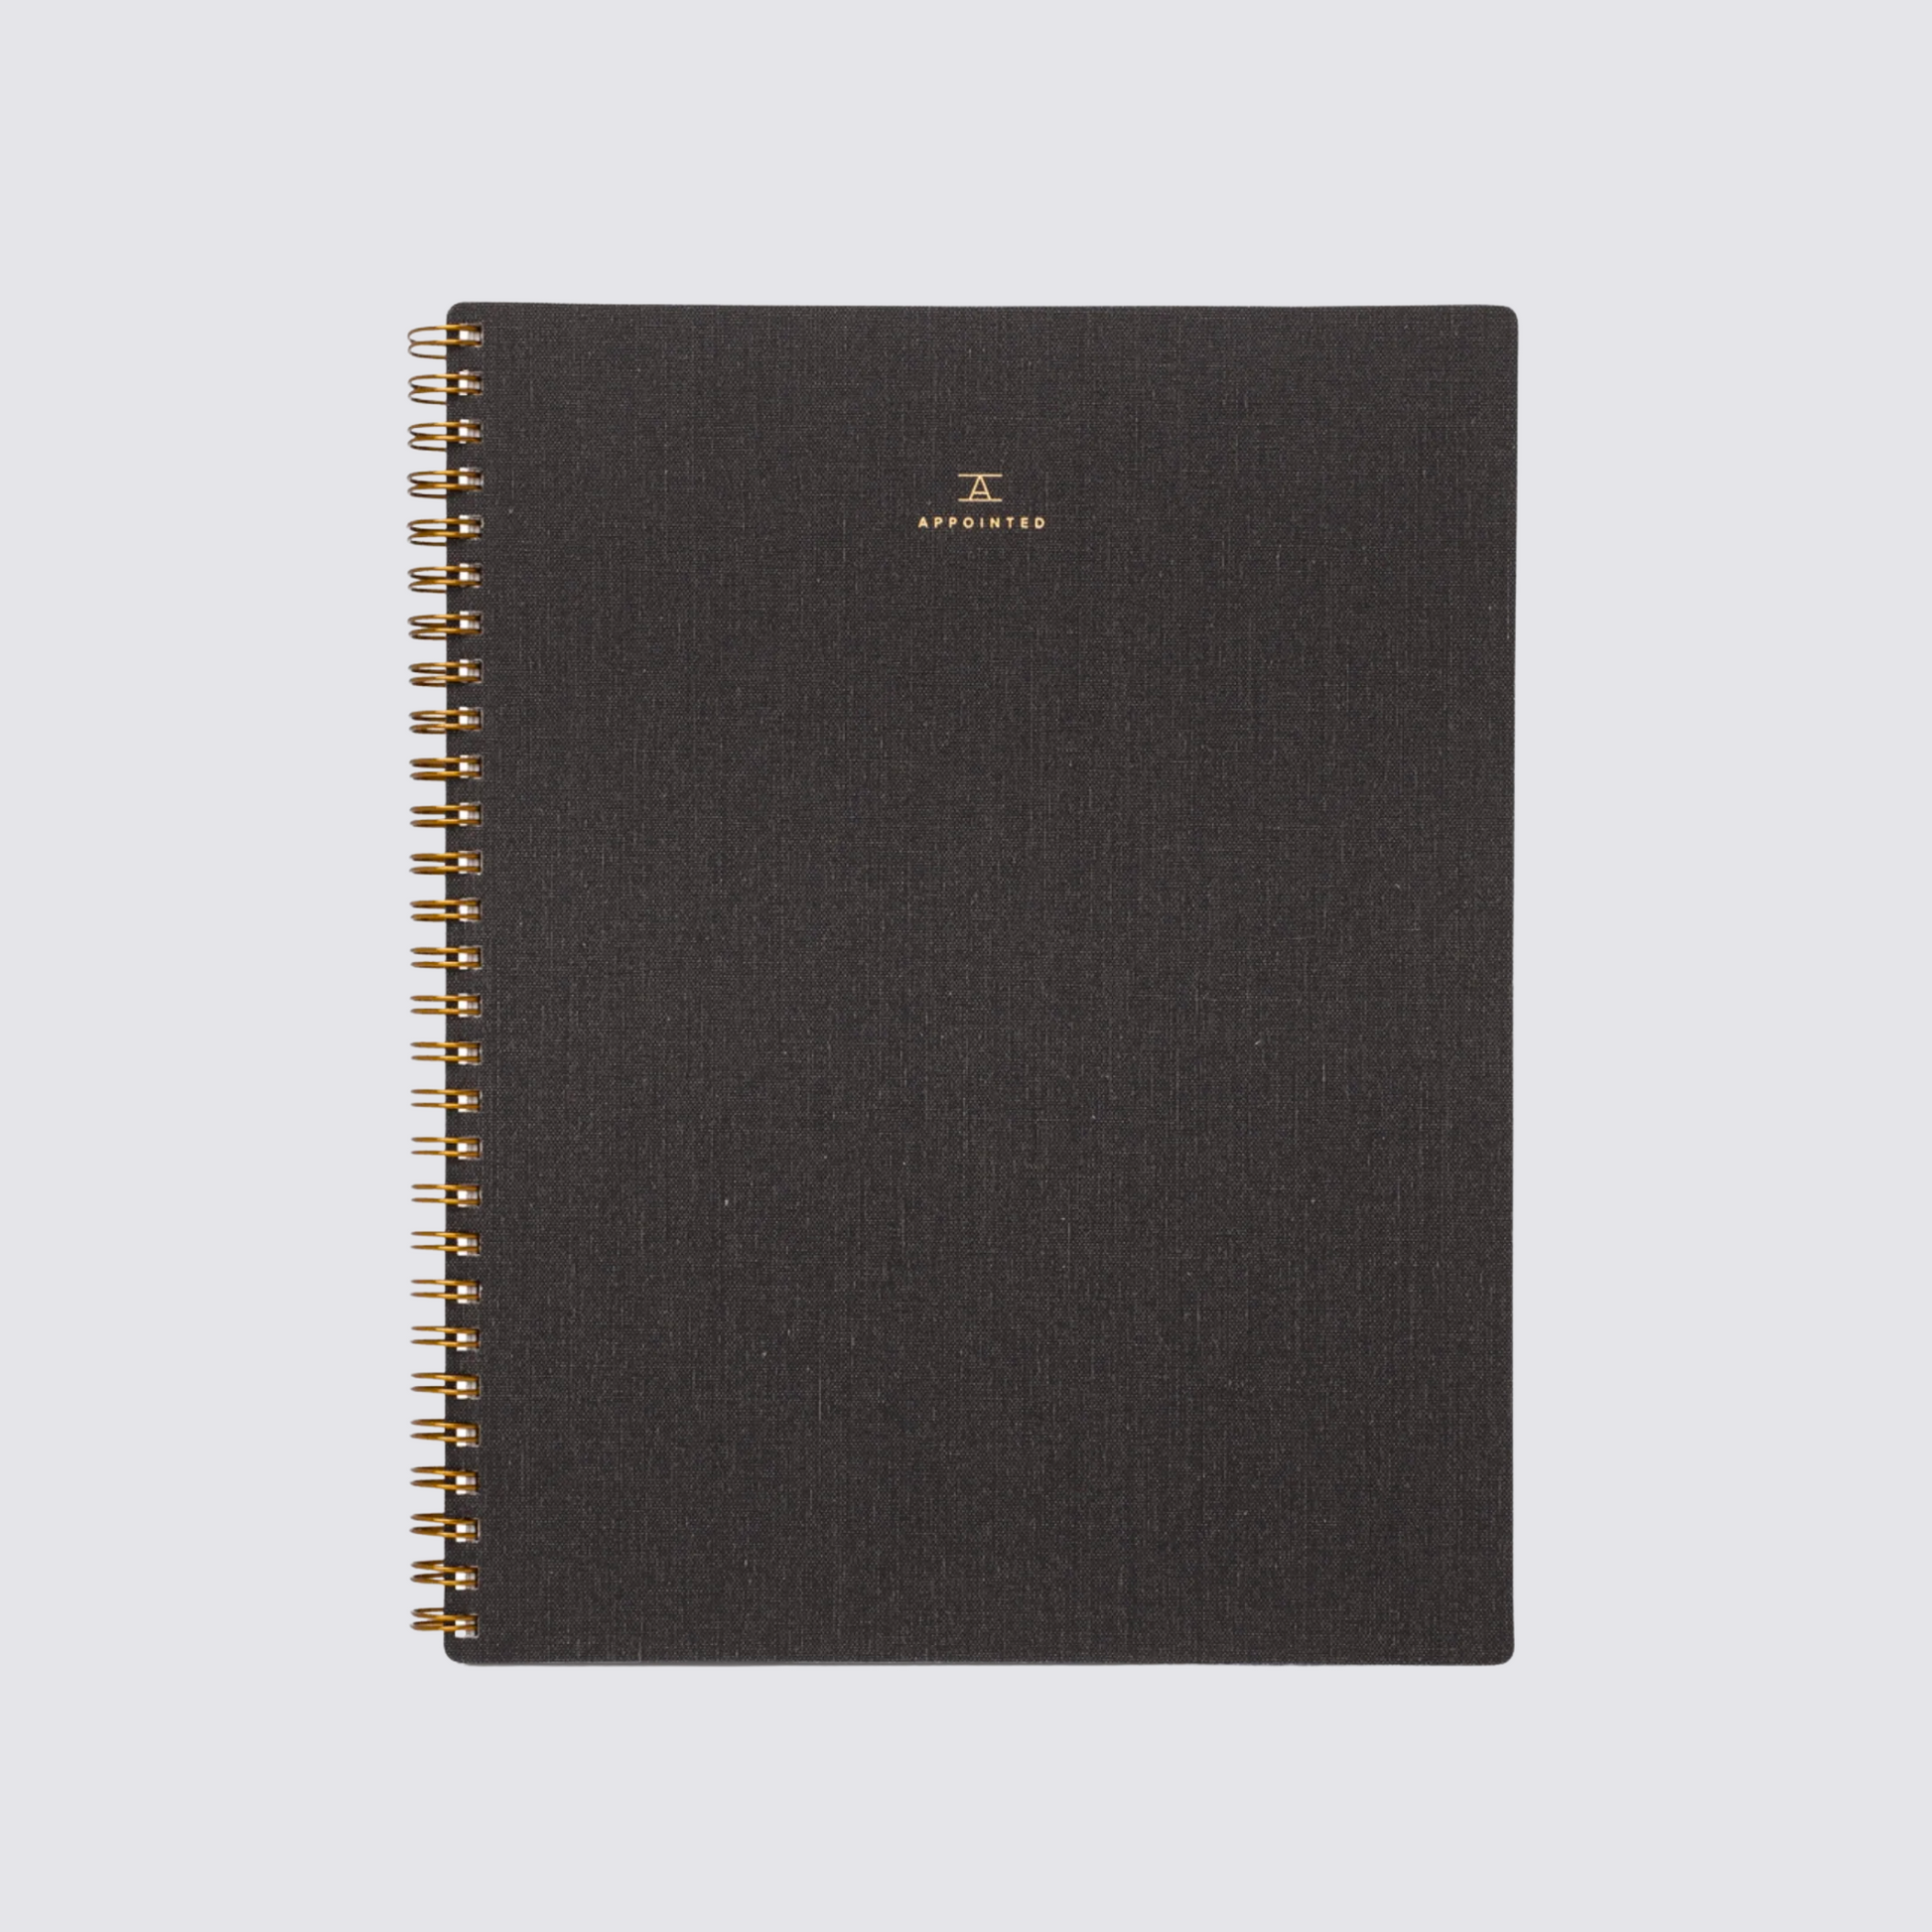 Appointed Notebook in Charcoal Grey